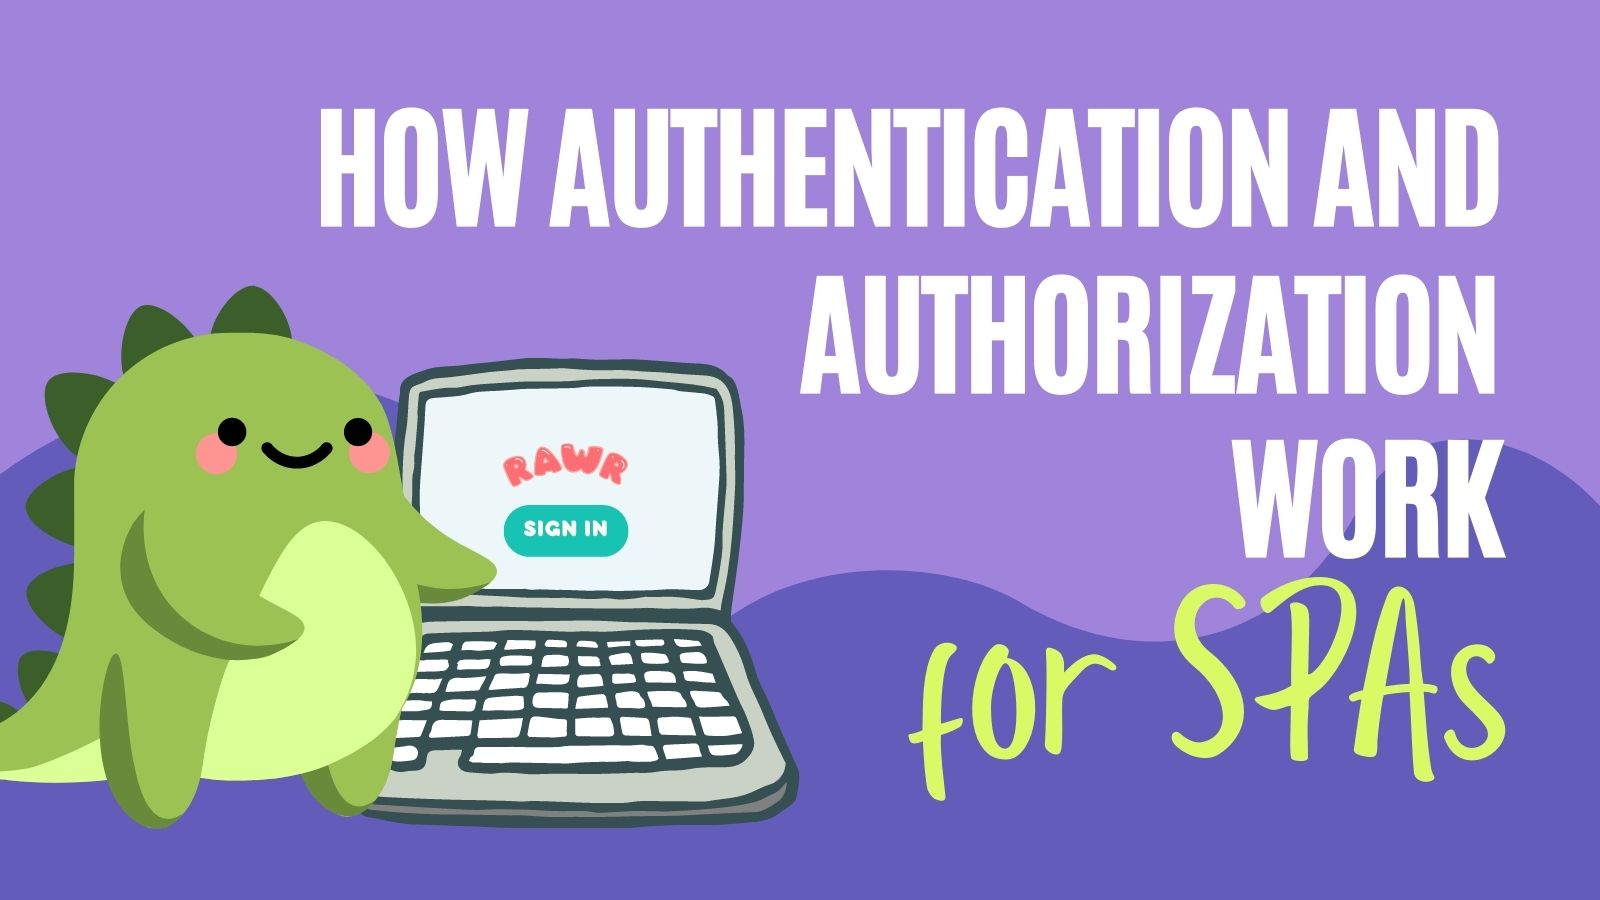 How Authentication and Authorization Work for SPAs